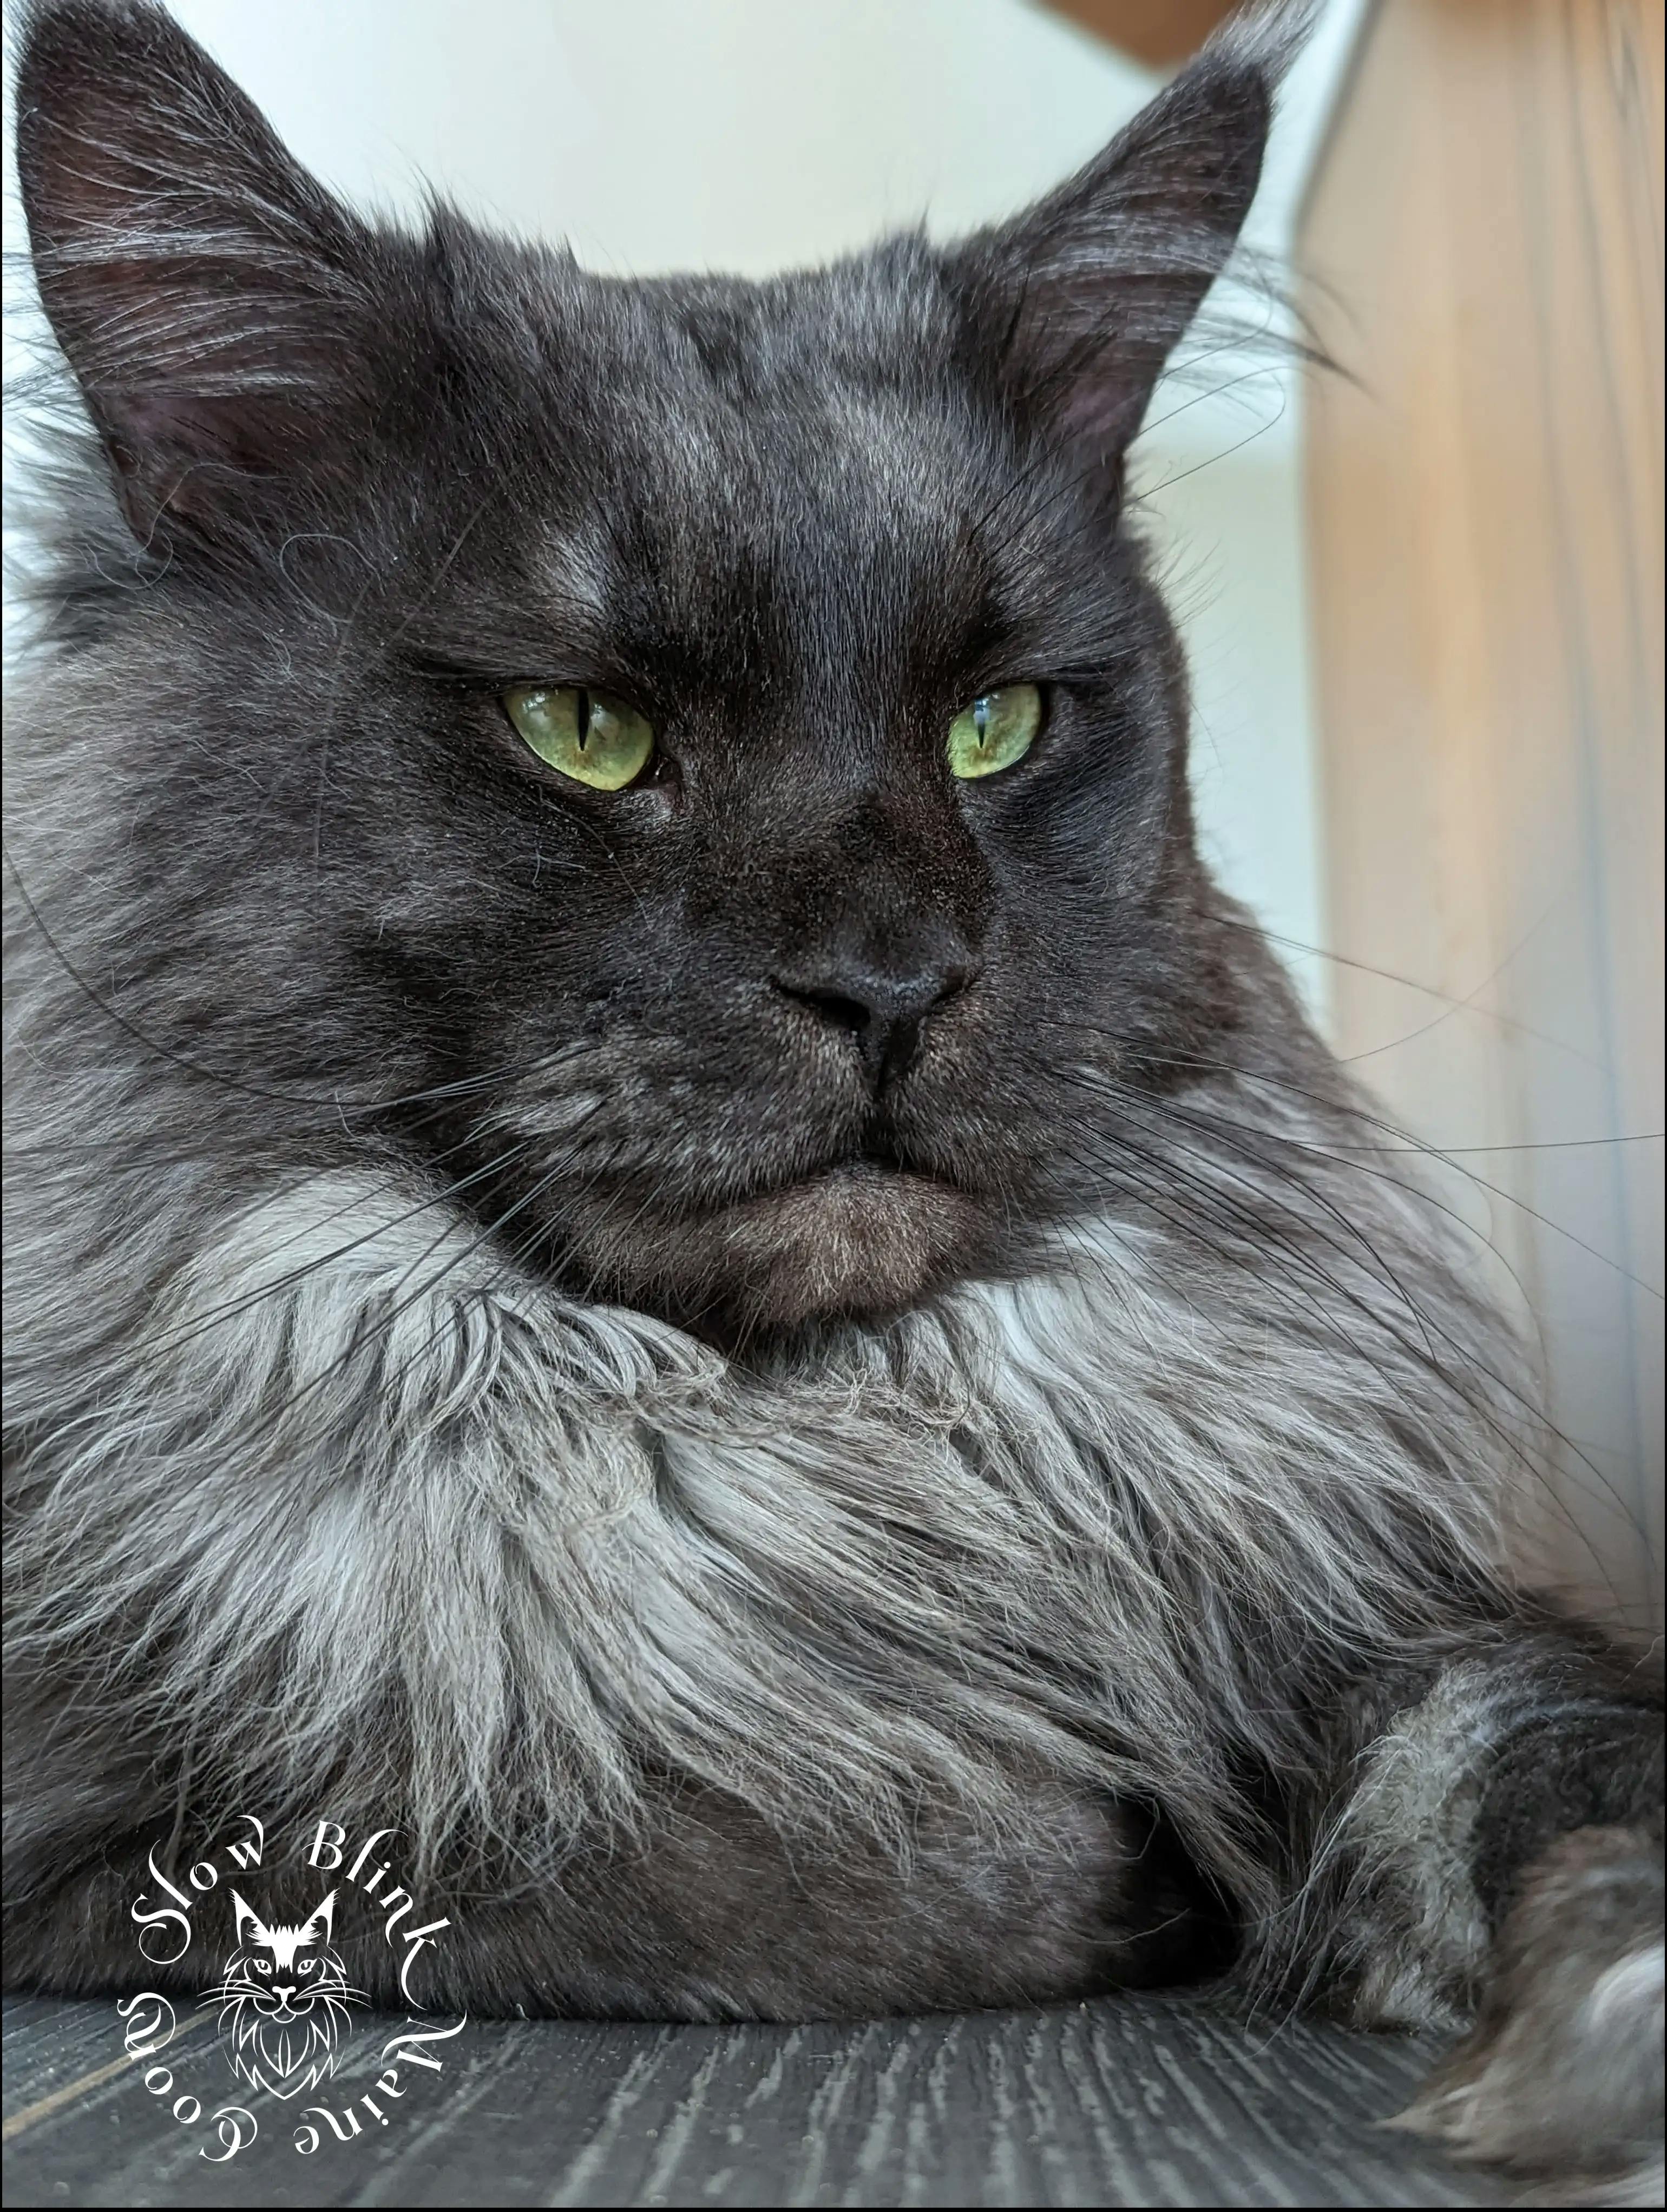 Black Smoke Polydactyl Breeding King Male Maine Coon Cat - Face shot focusing on his mane and green eyes